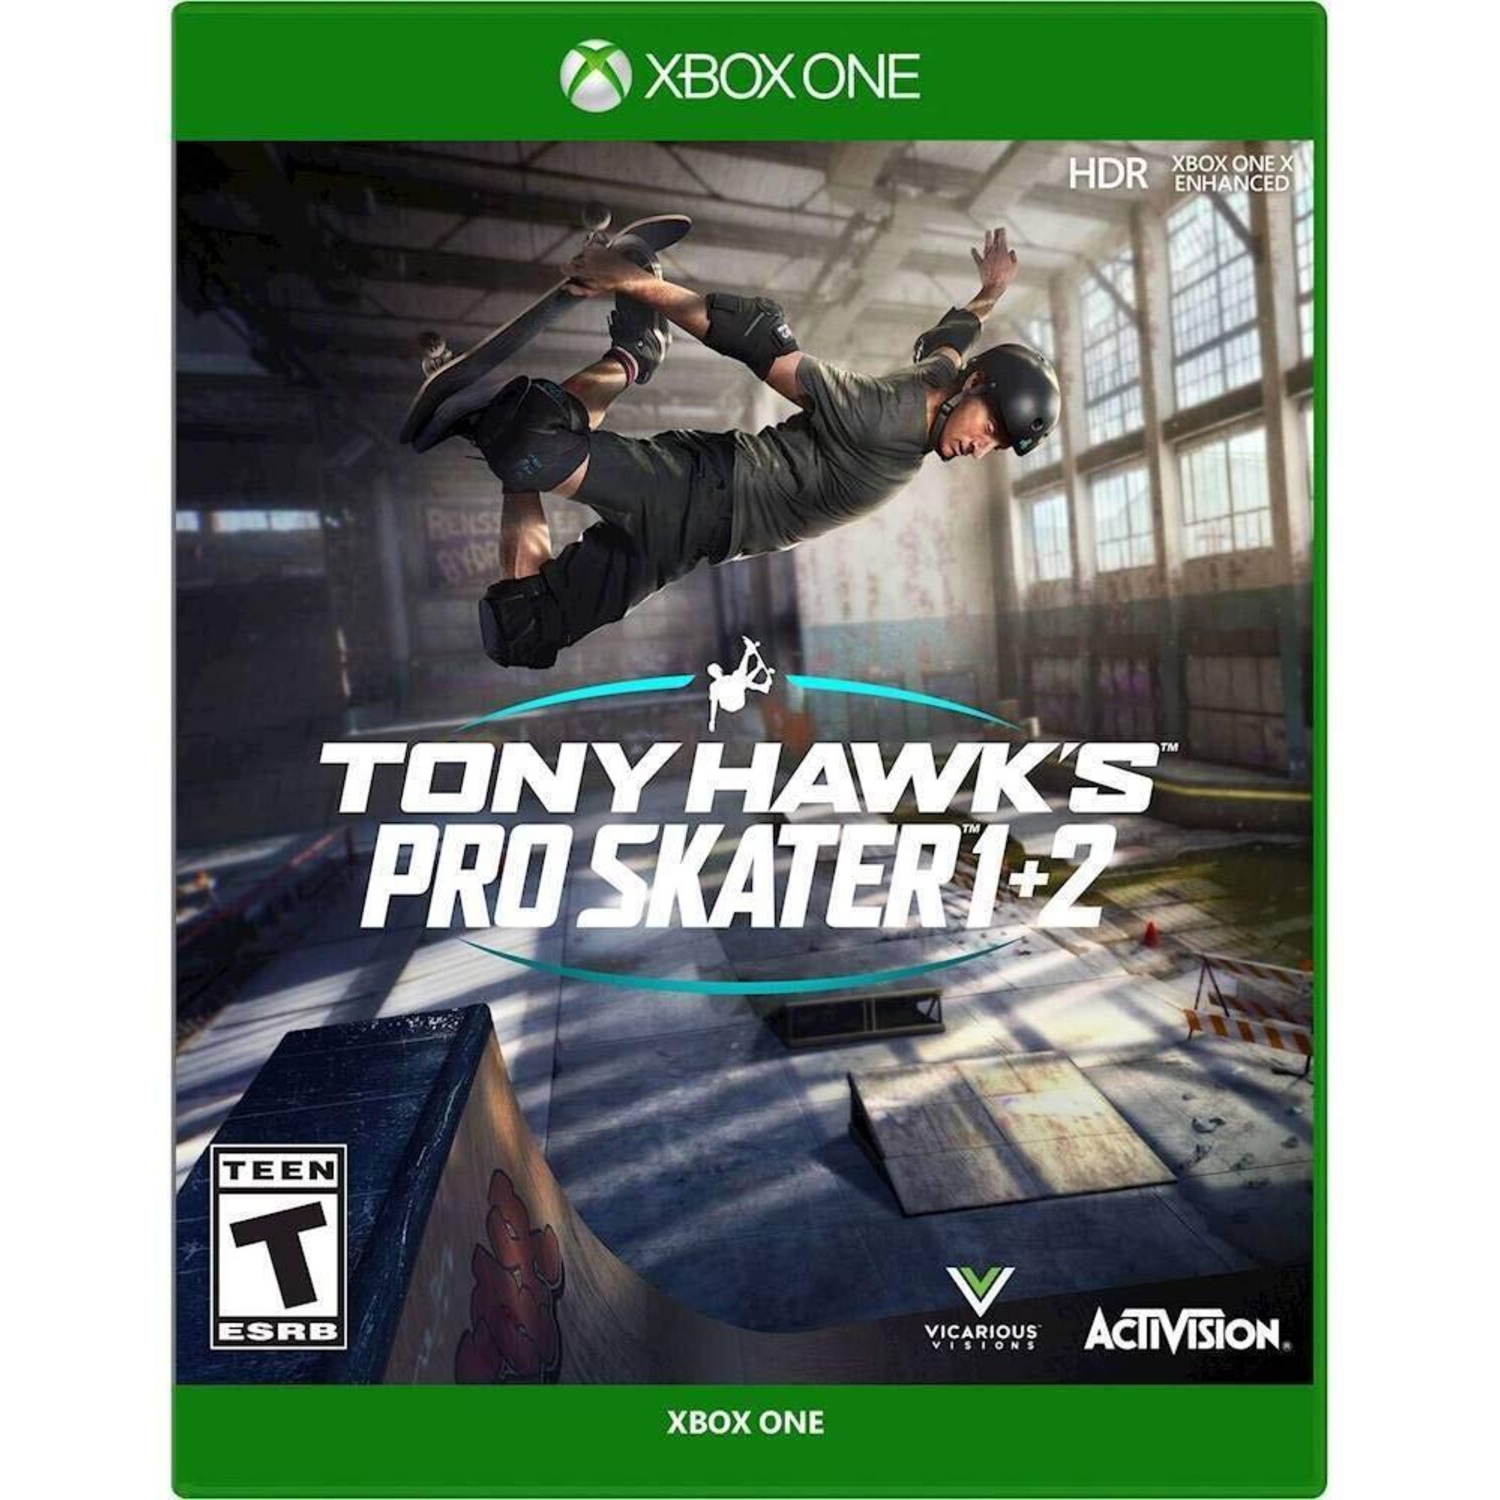 Tony Hawk Pro Skater 1 + 2 for Xbox One [VIDEOGAMES]